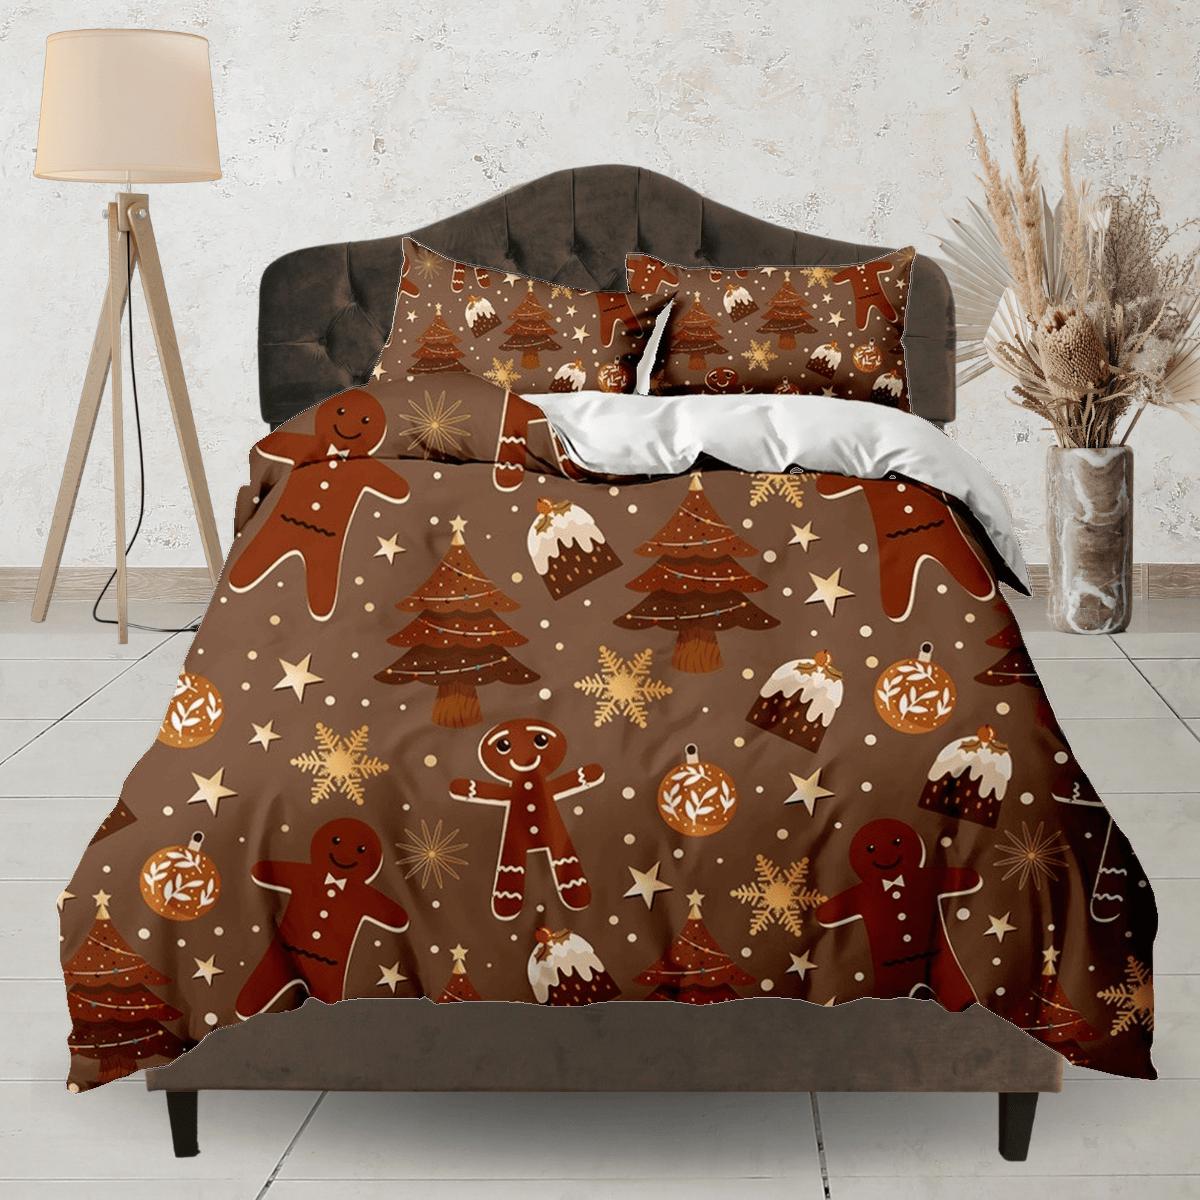 daintyduvet Chocolatey gingerbread Christmas bedding, pillowcase holiday gift brown duvet cover king queen twin toddler bedding baby Christmas farmhouse